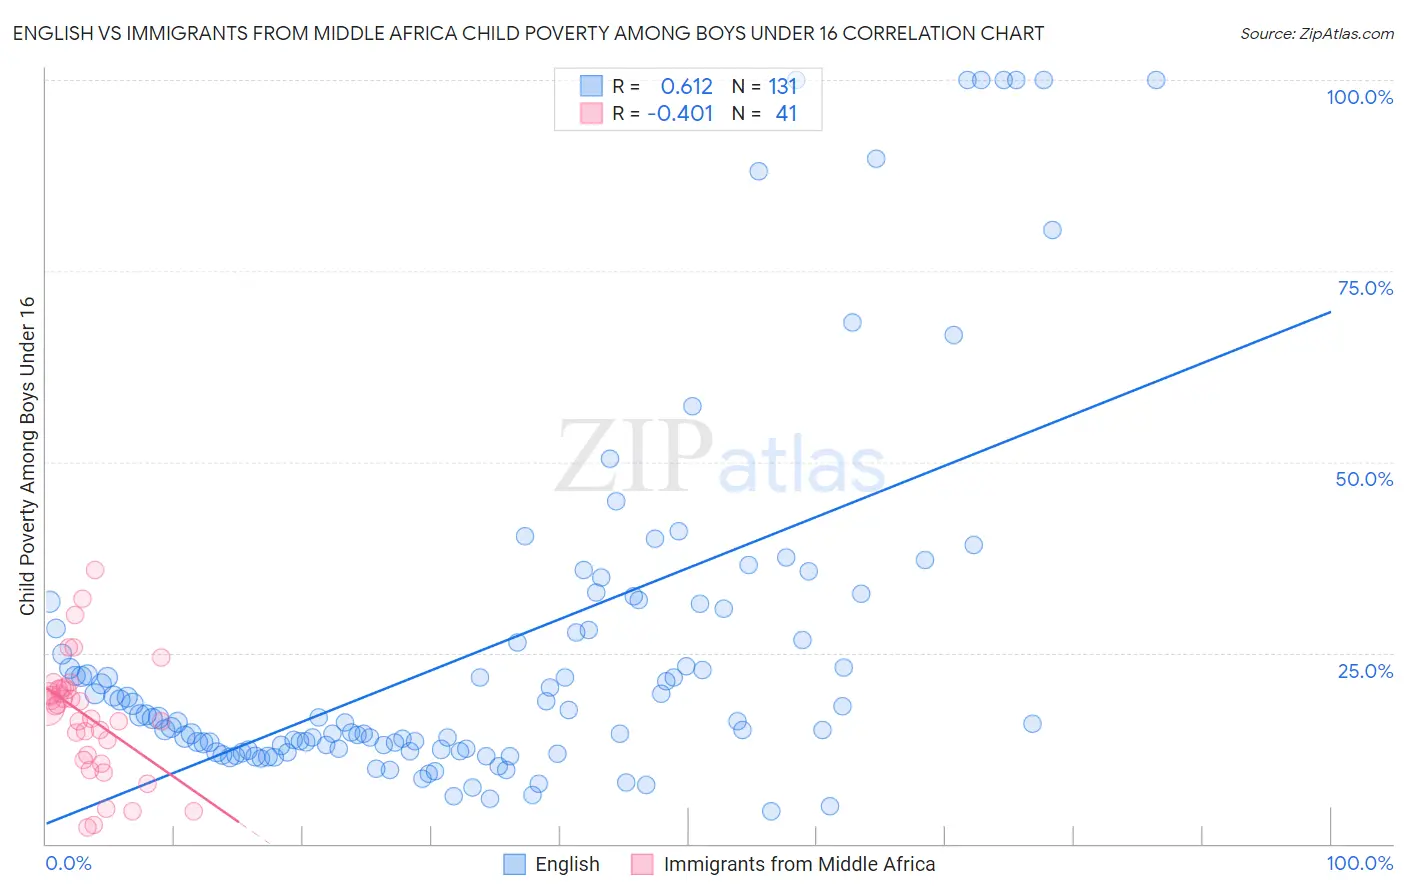 English vs Immigrants from Middle Africa Child Poverty Among Boys Under 16